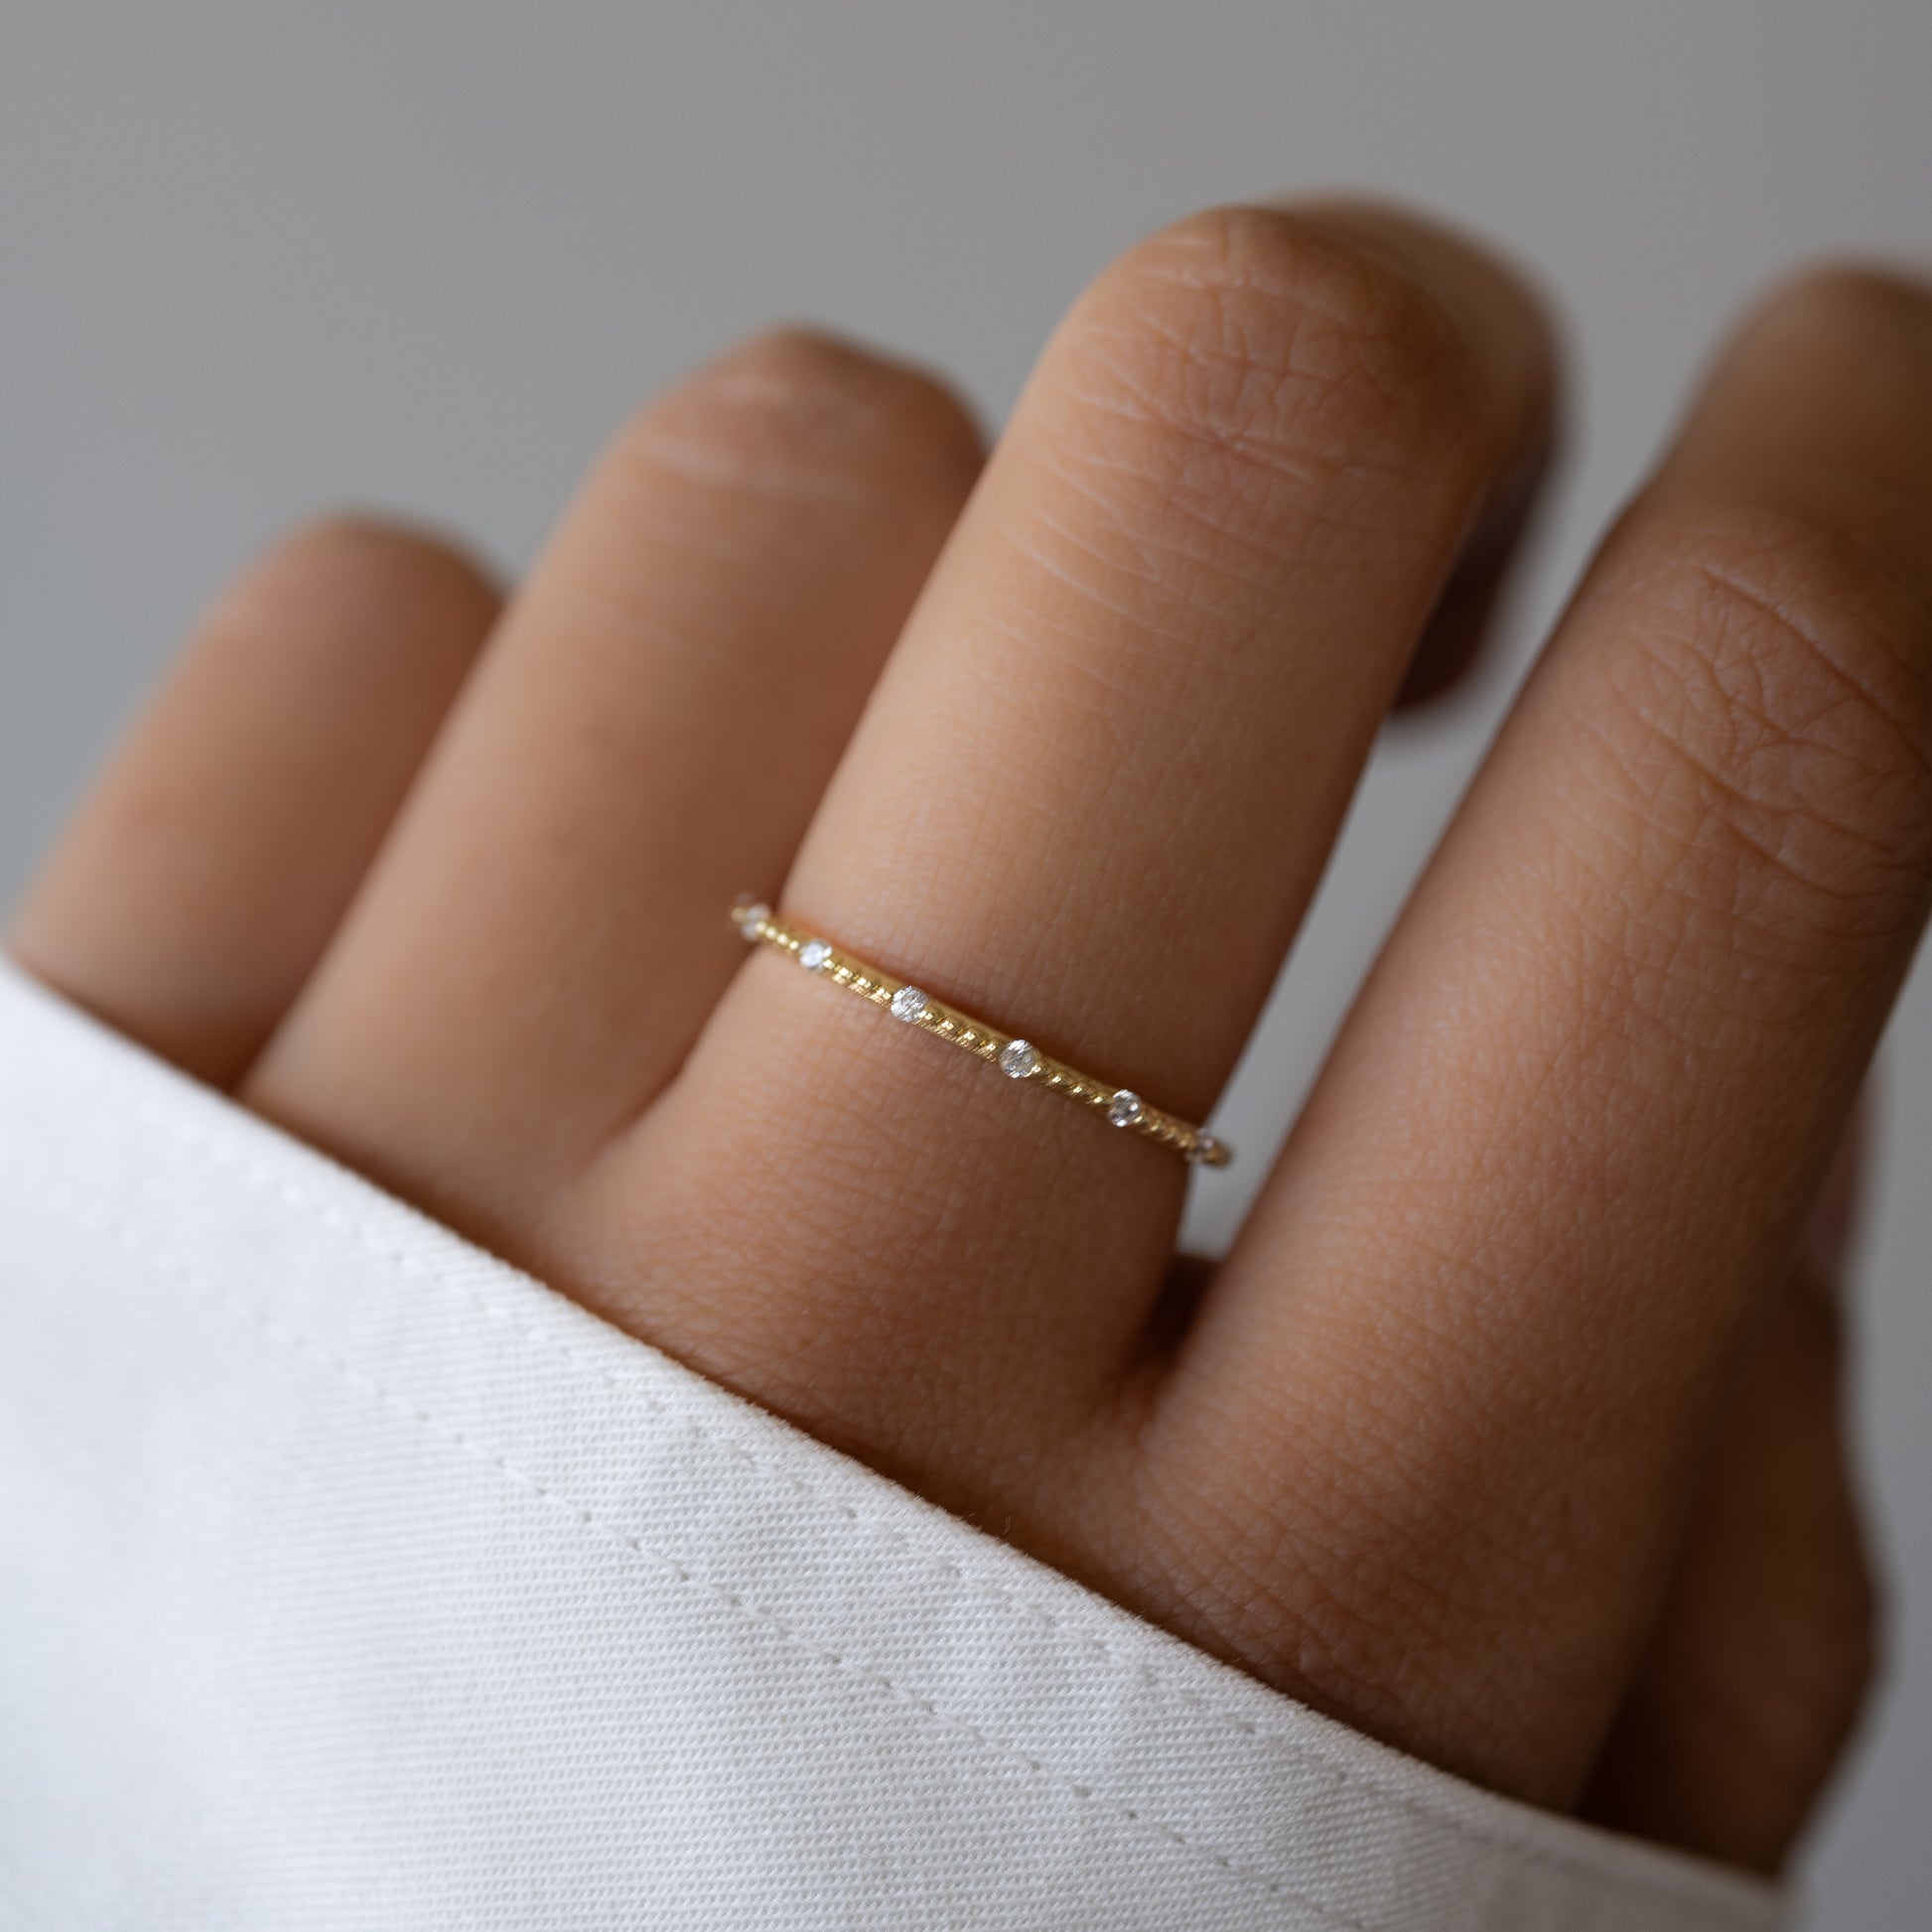 Dainty stacking ring on model